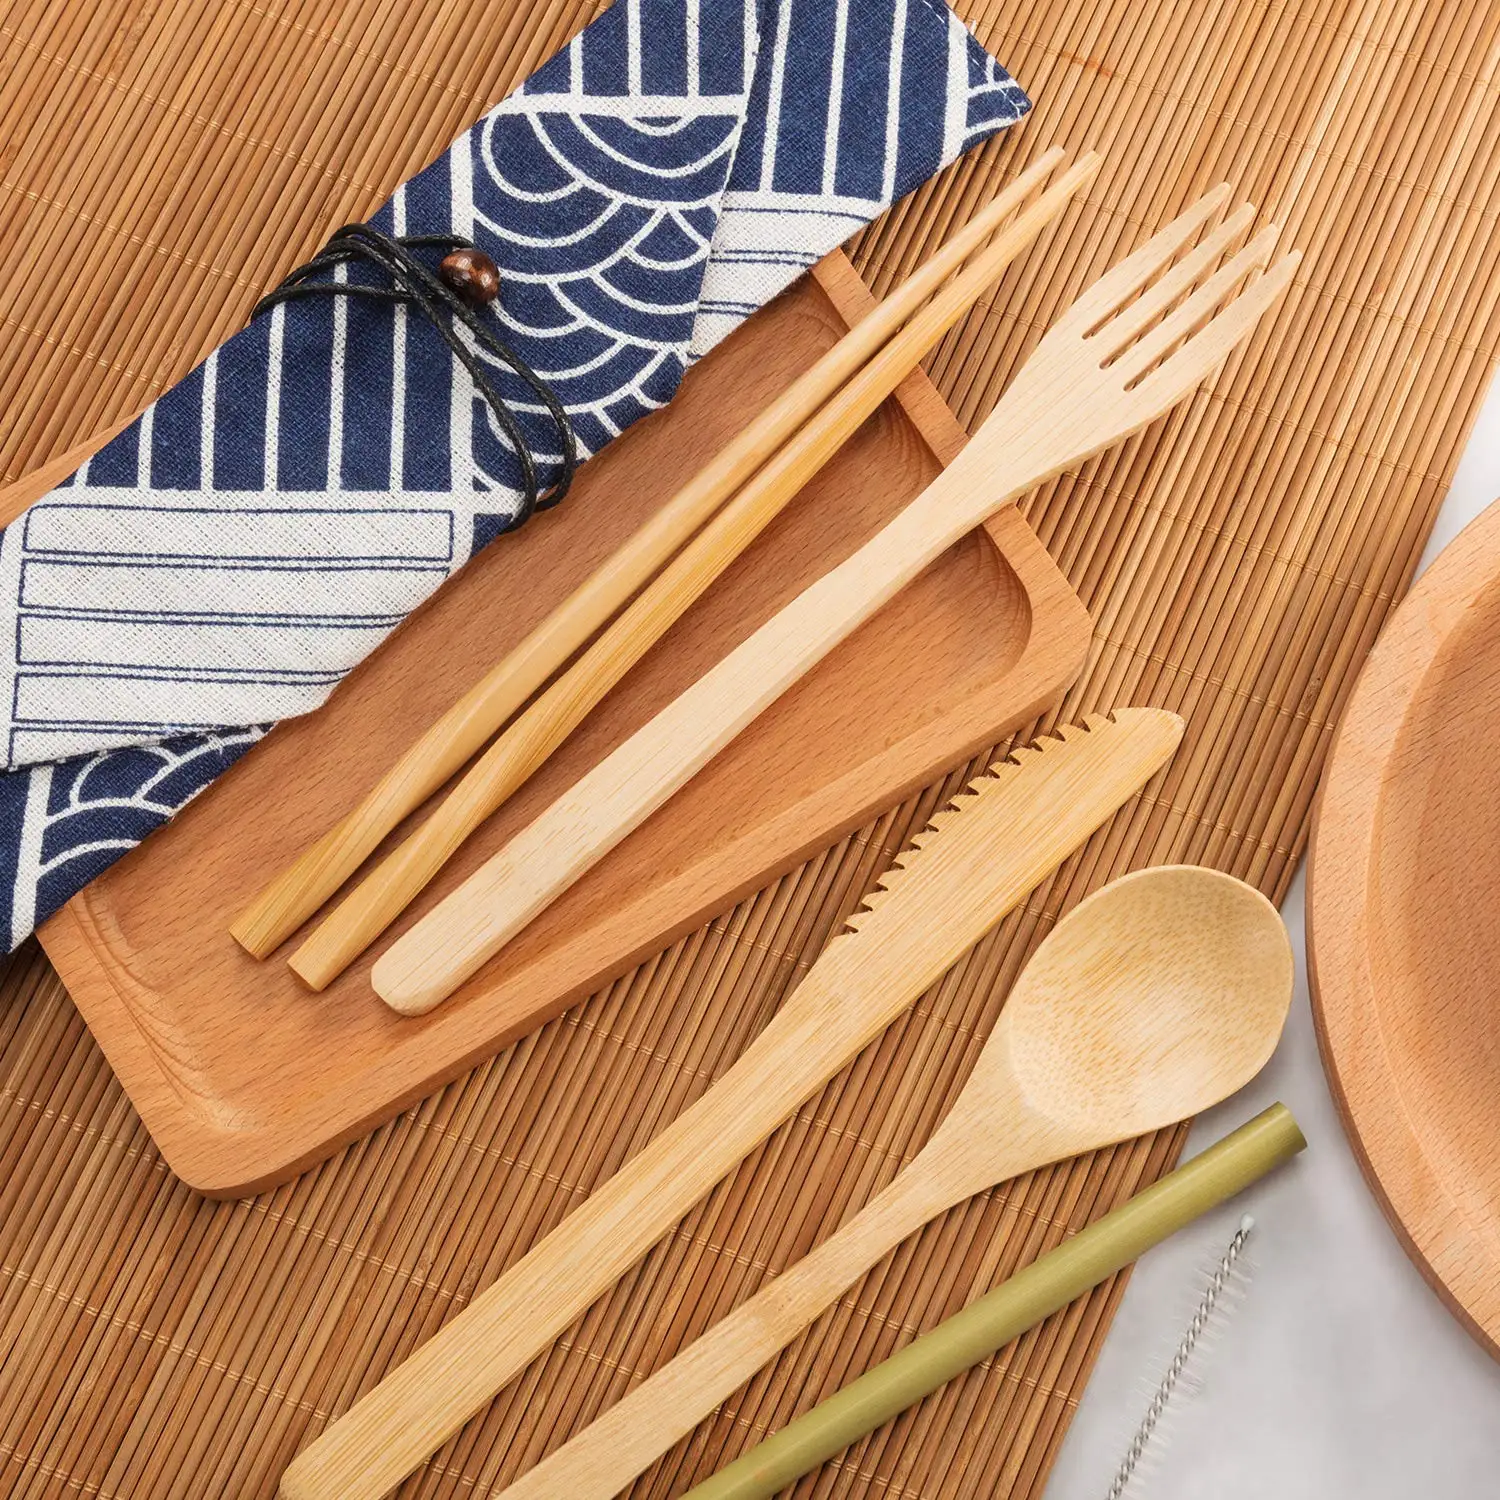 Reusable Bamboo Utensils Travel Cutlery Set With Case,Forks Knives